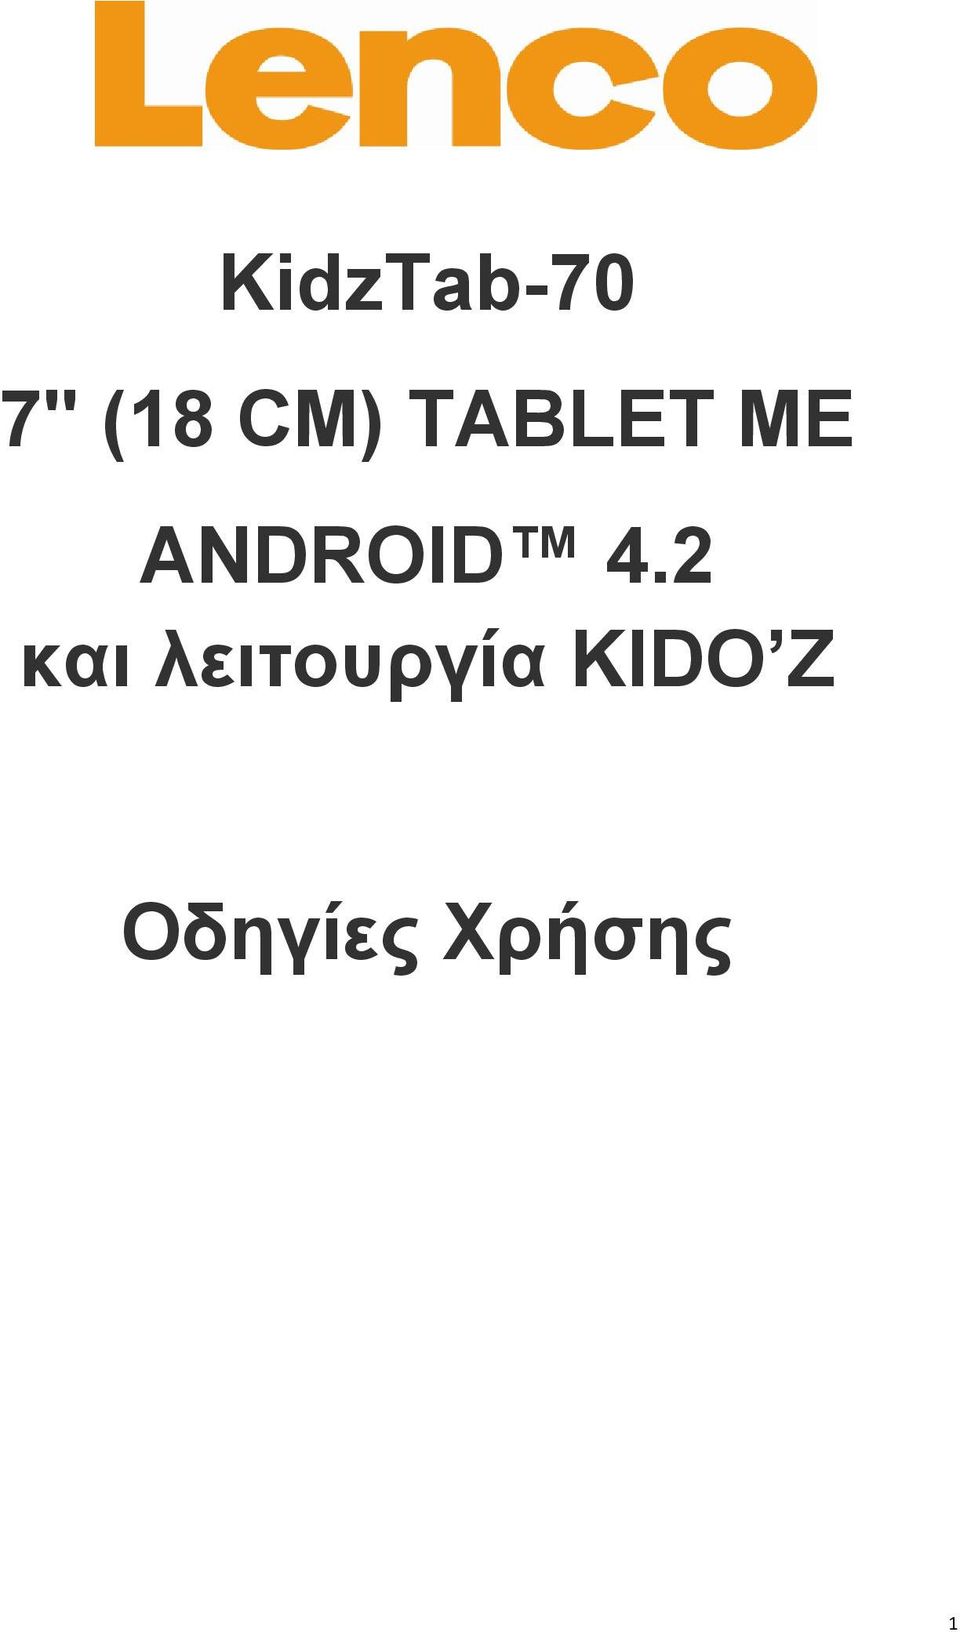 ANDROID 4.